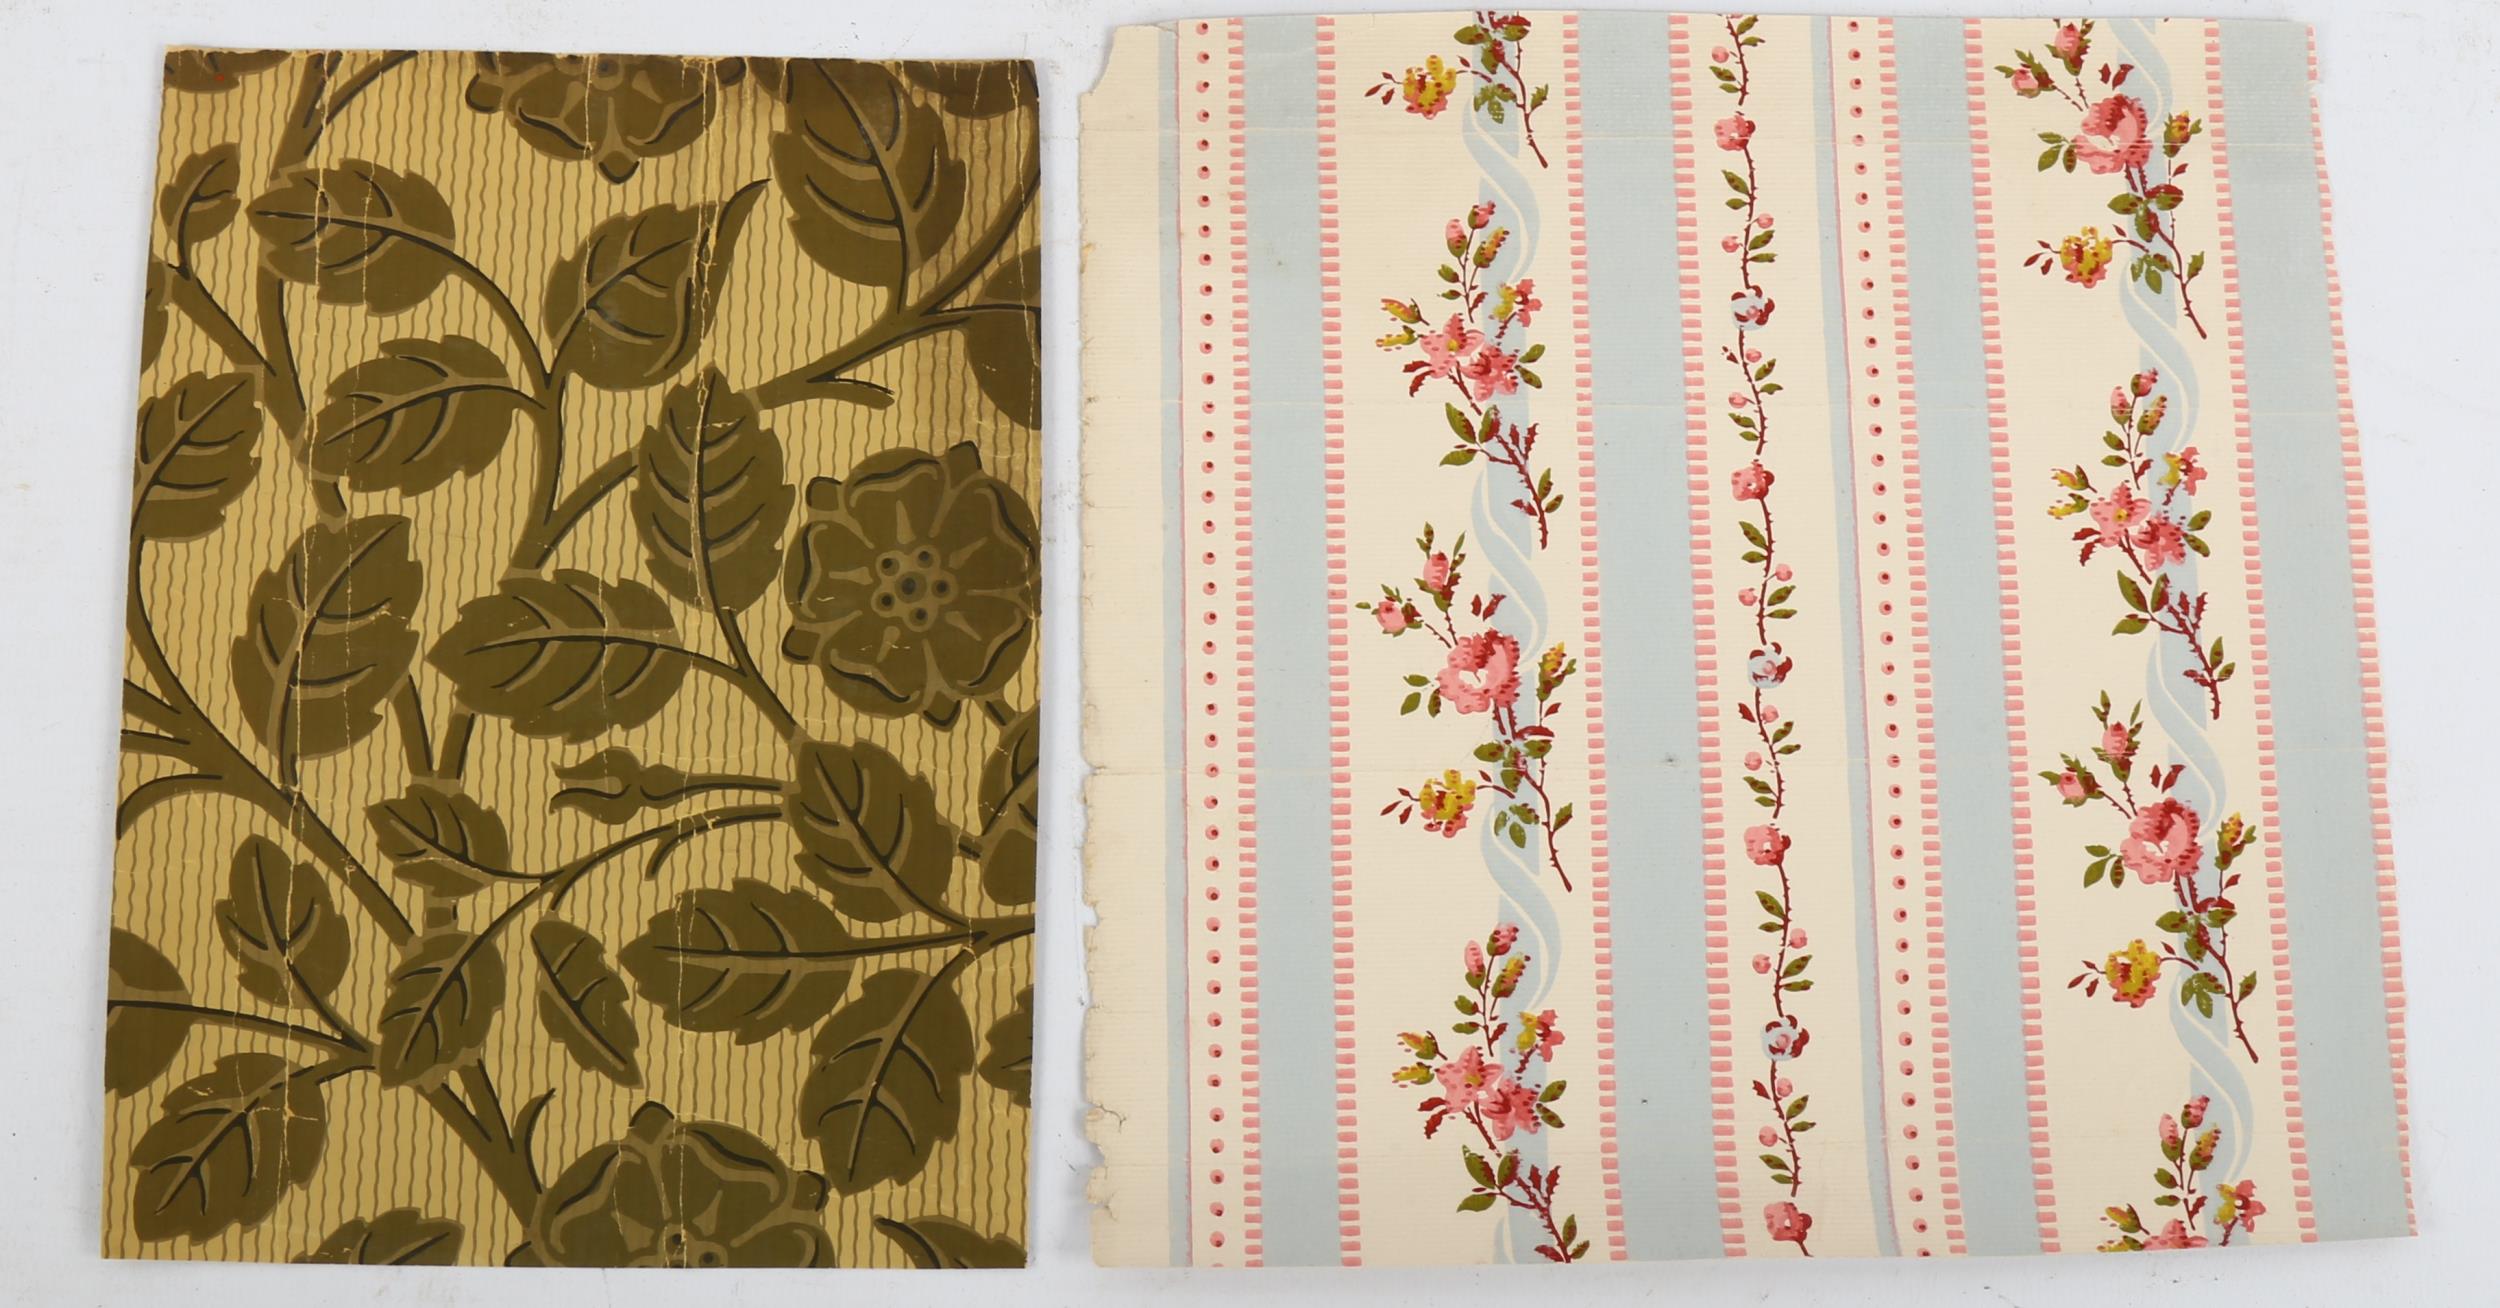 Late 18th/early 19th century wallpaper samples from a house of Thomas Carlyle Chelsea, 21cm x